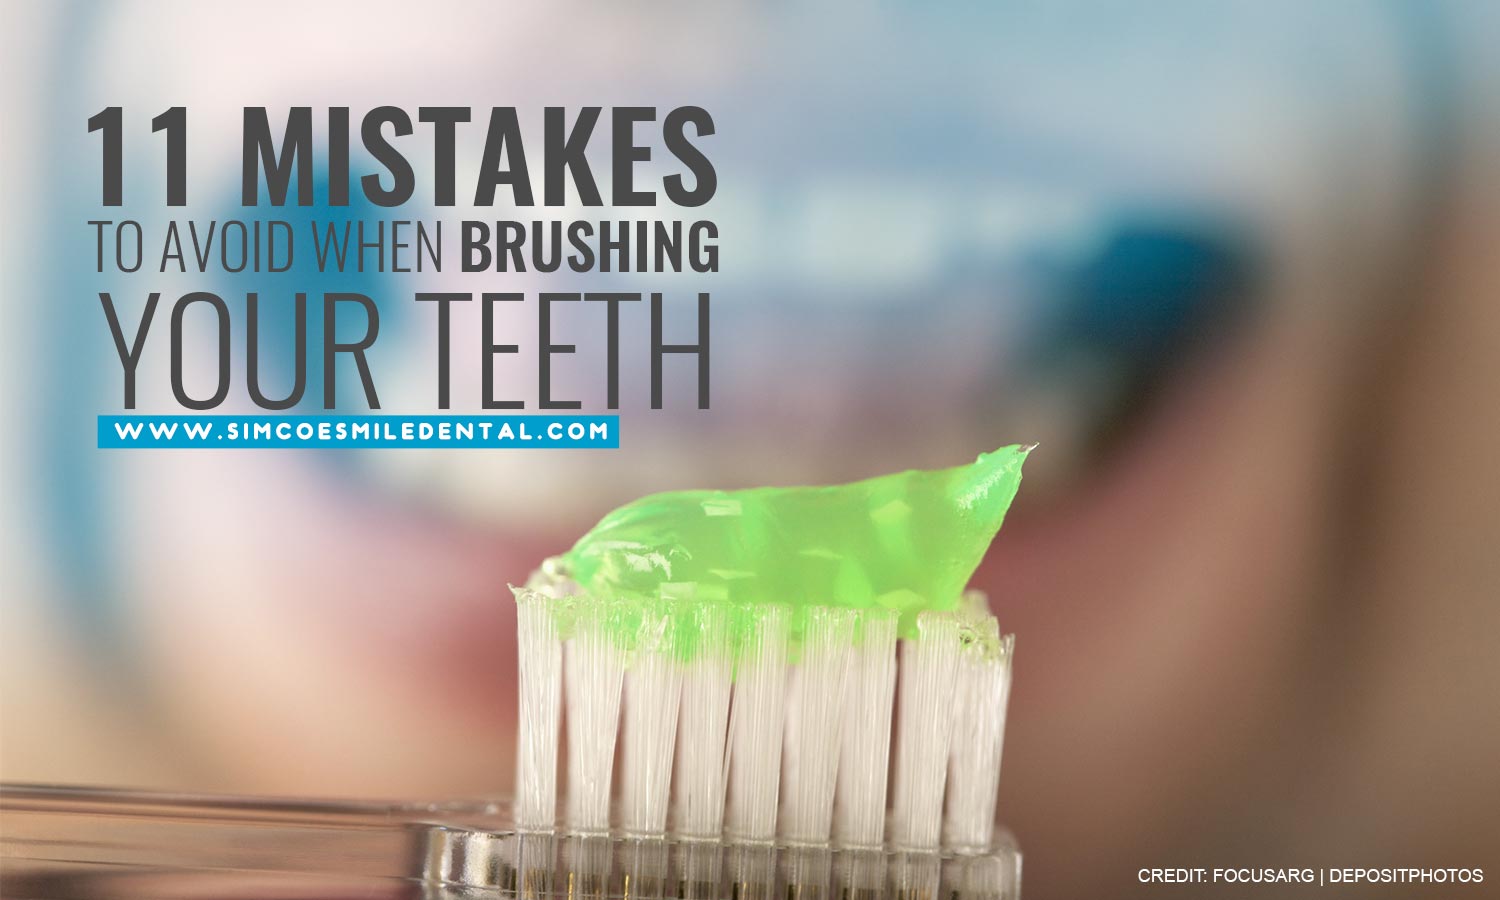 11 Mistakes to Avoid When Brushing Your Teeth